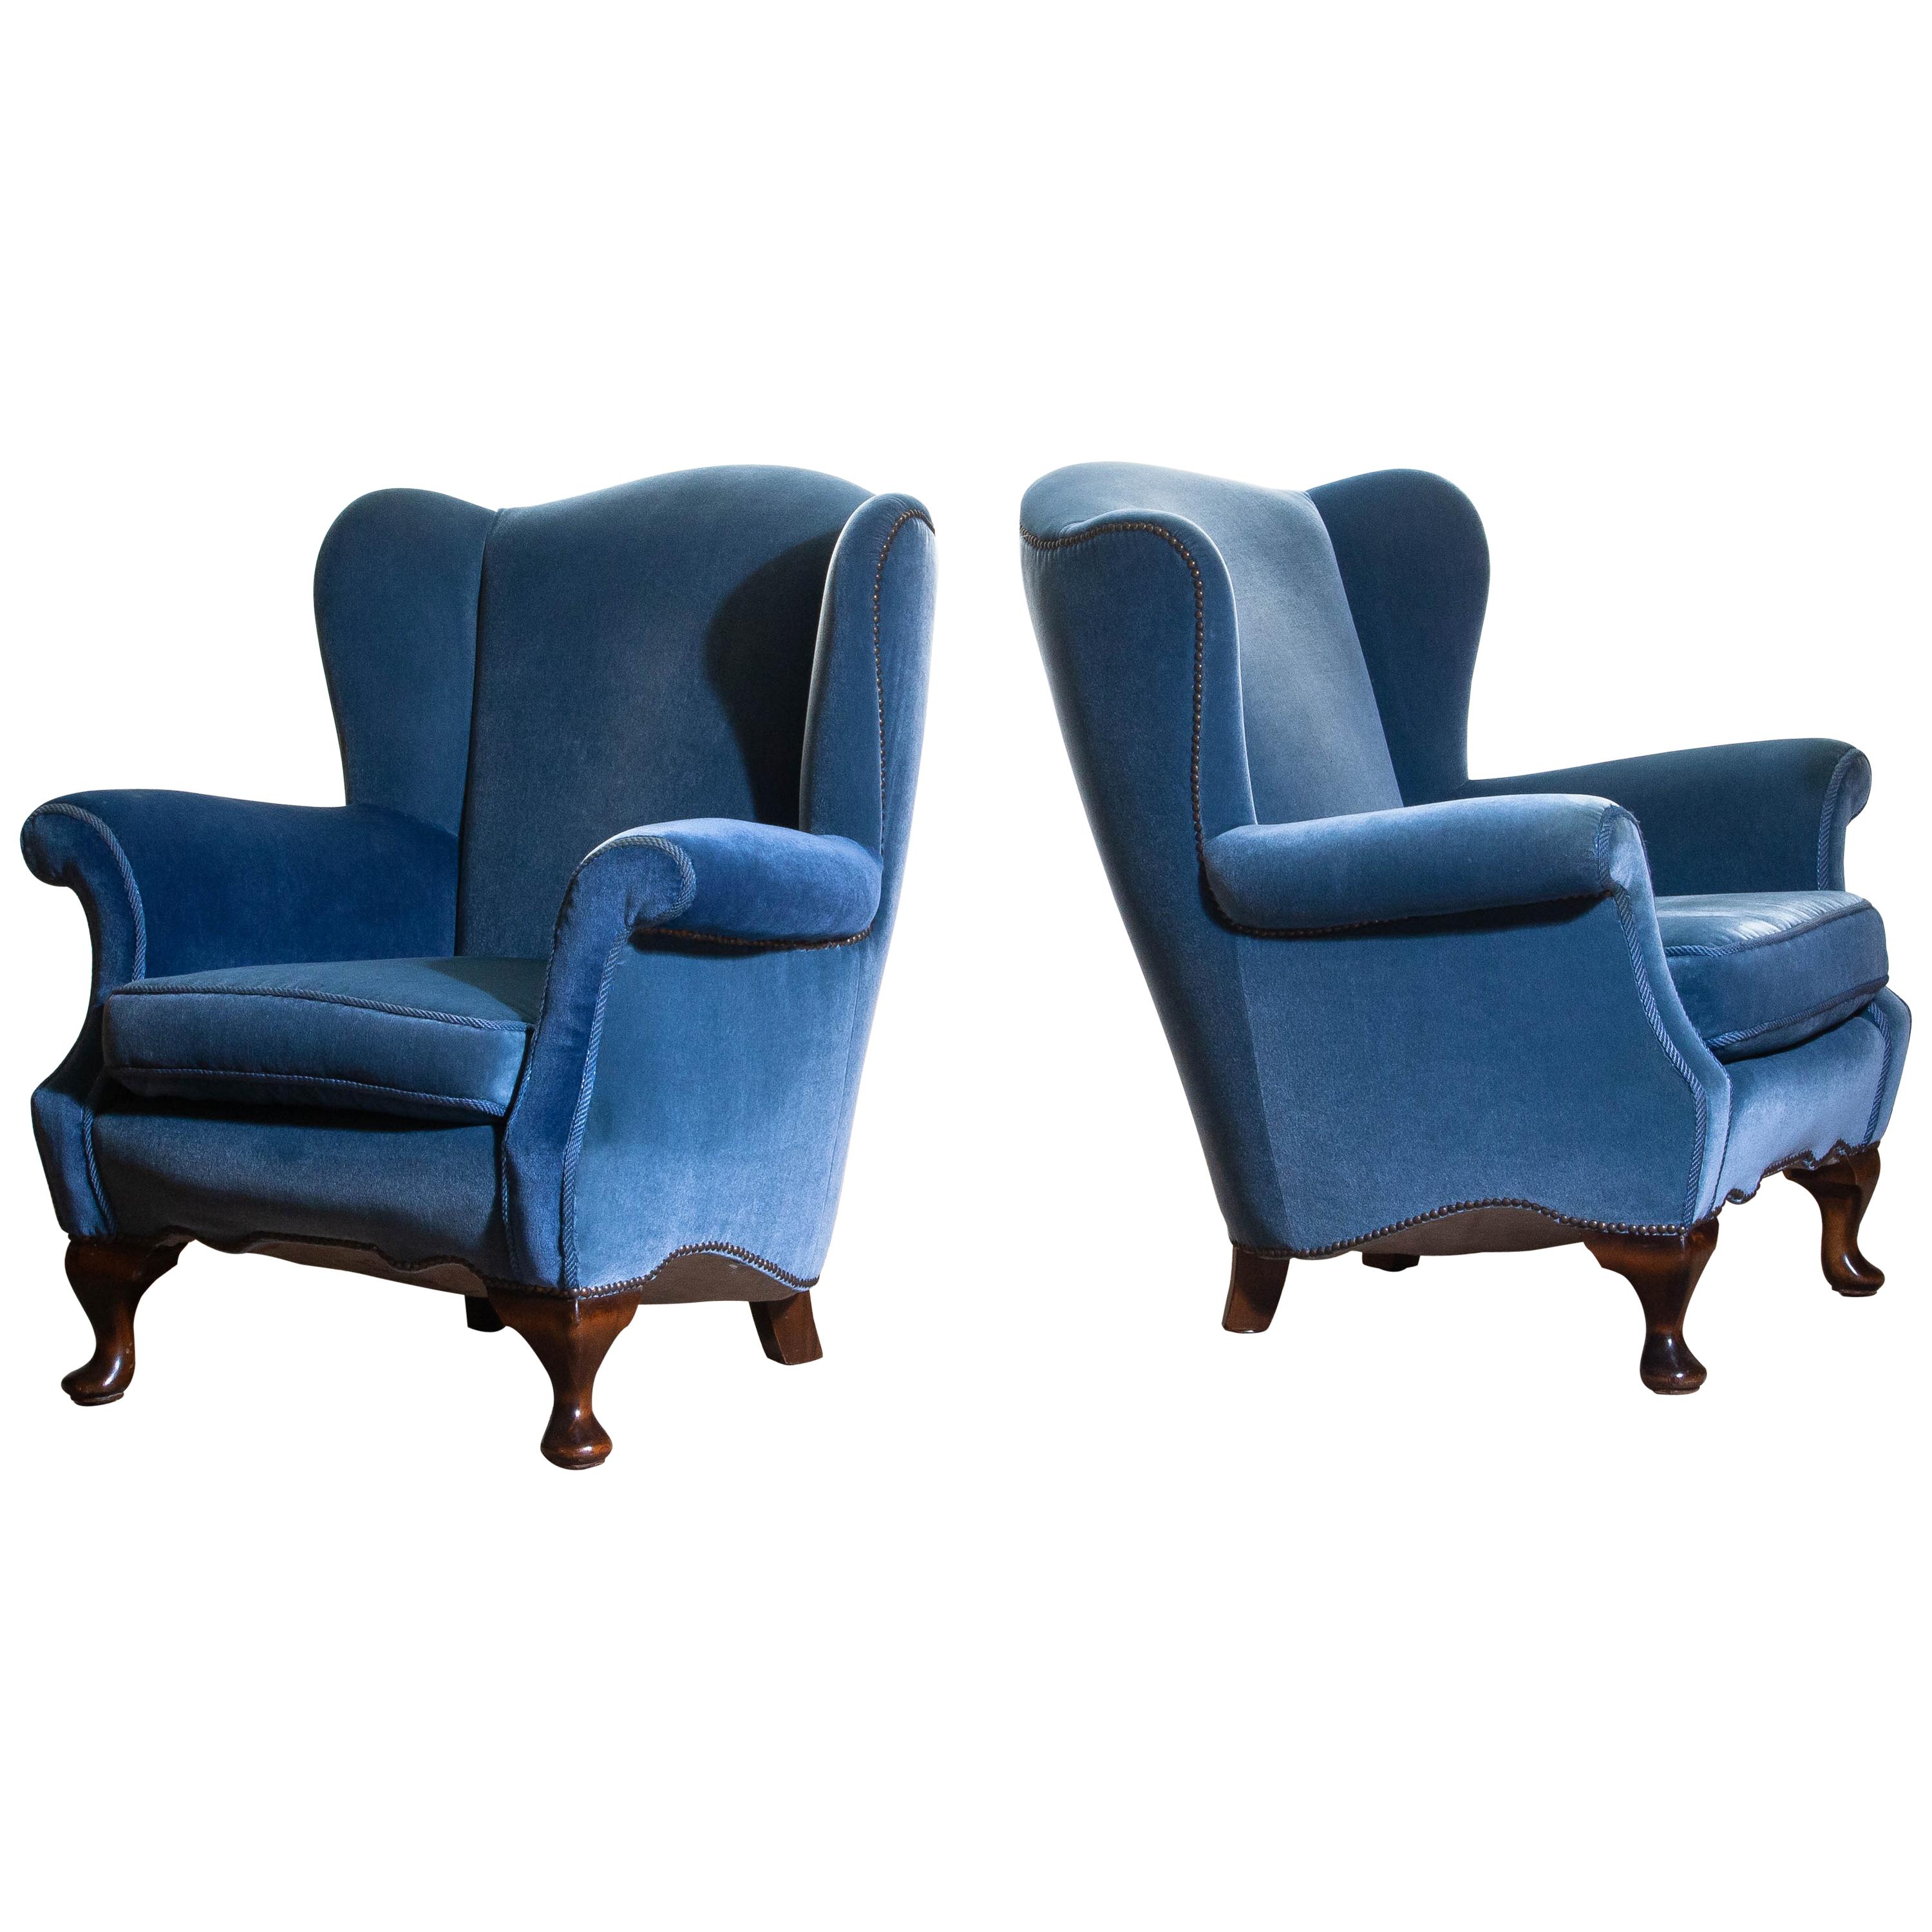 Unique set of two extremely beautiful Swedish club chairs in blue velvet from the 1920s.
The chairs are completely restored in 1987 (only original materials are used) and after one of the chairs received
new velvet on the armrests. See